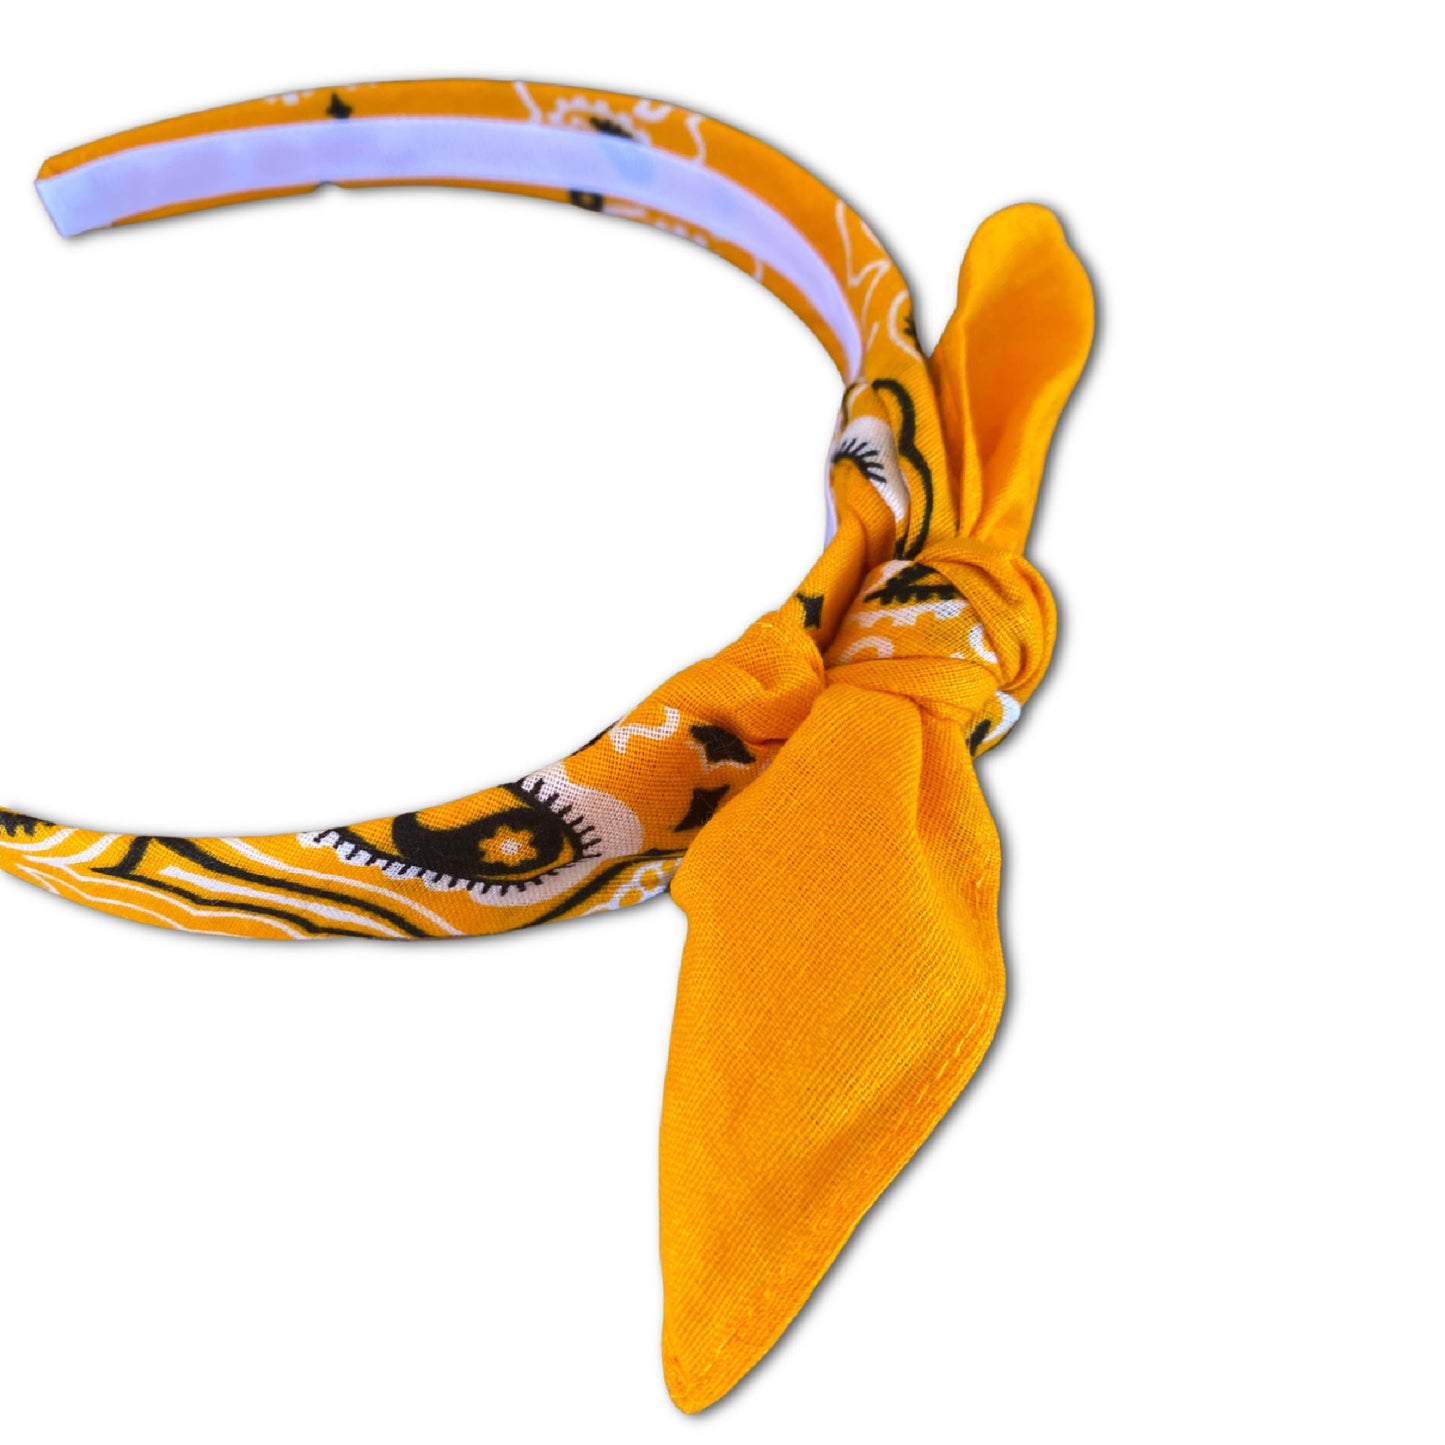 Gold Yellow paisley kerchief bandana is wrapped around a plastic headband and tied in a knot. Hairband is designed to not slip